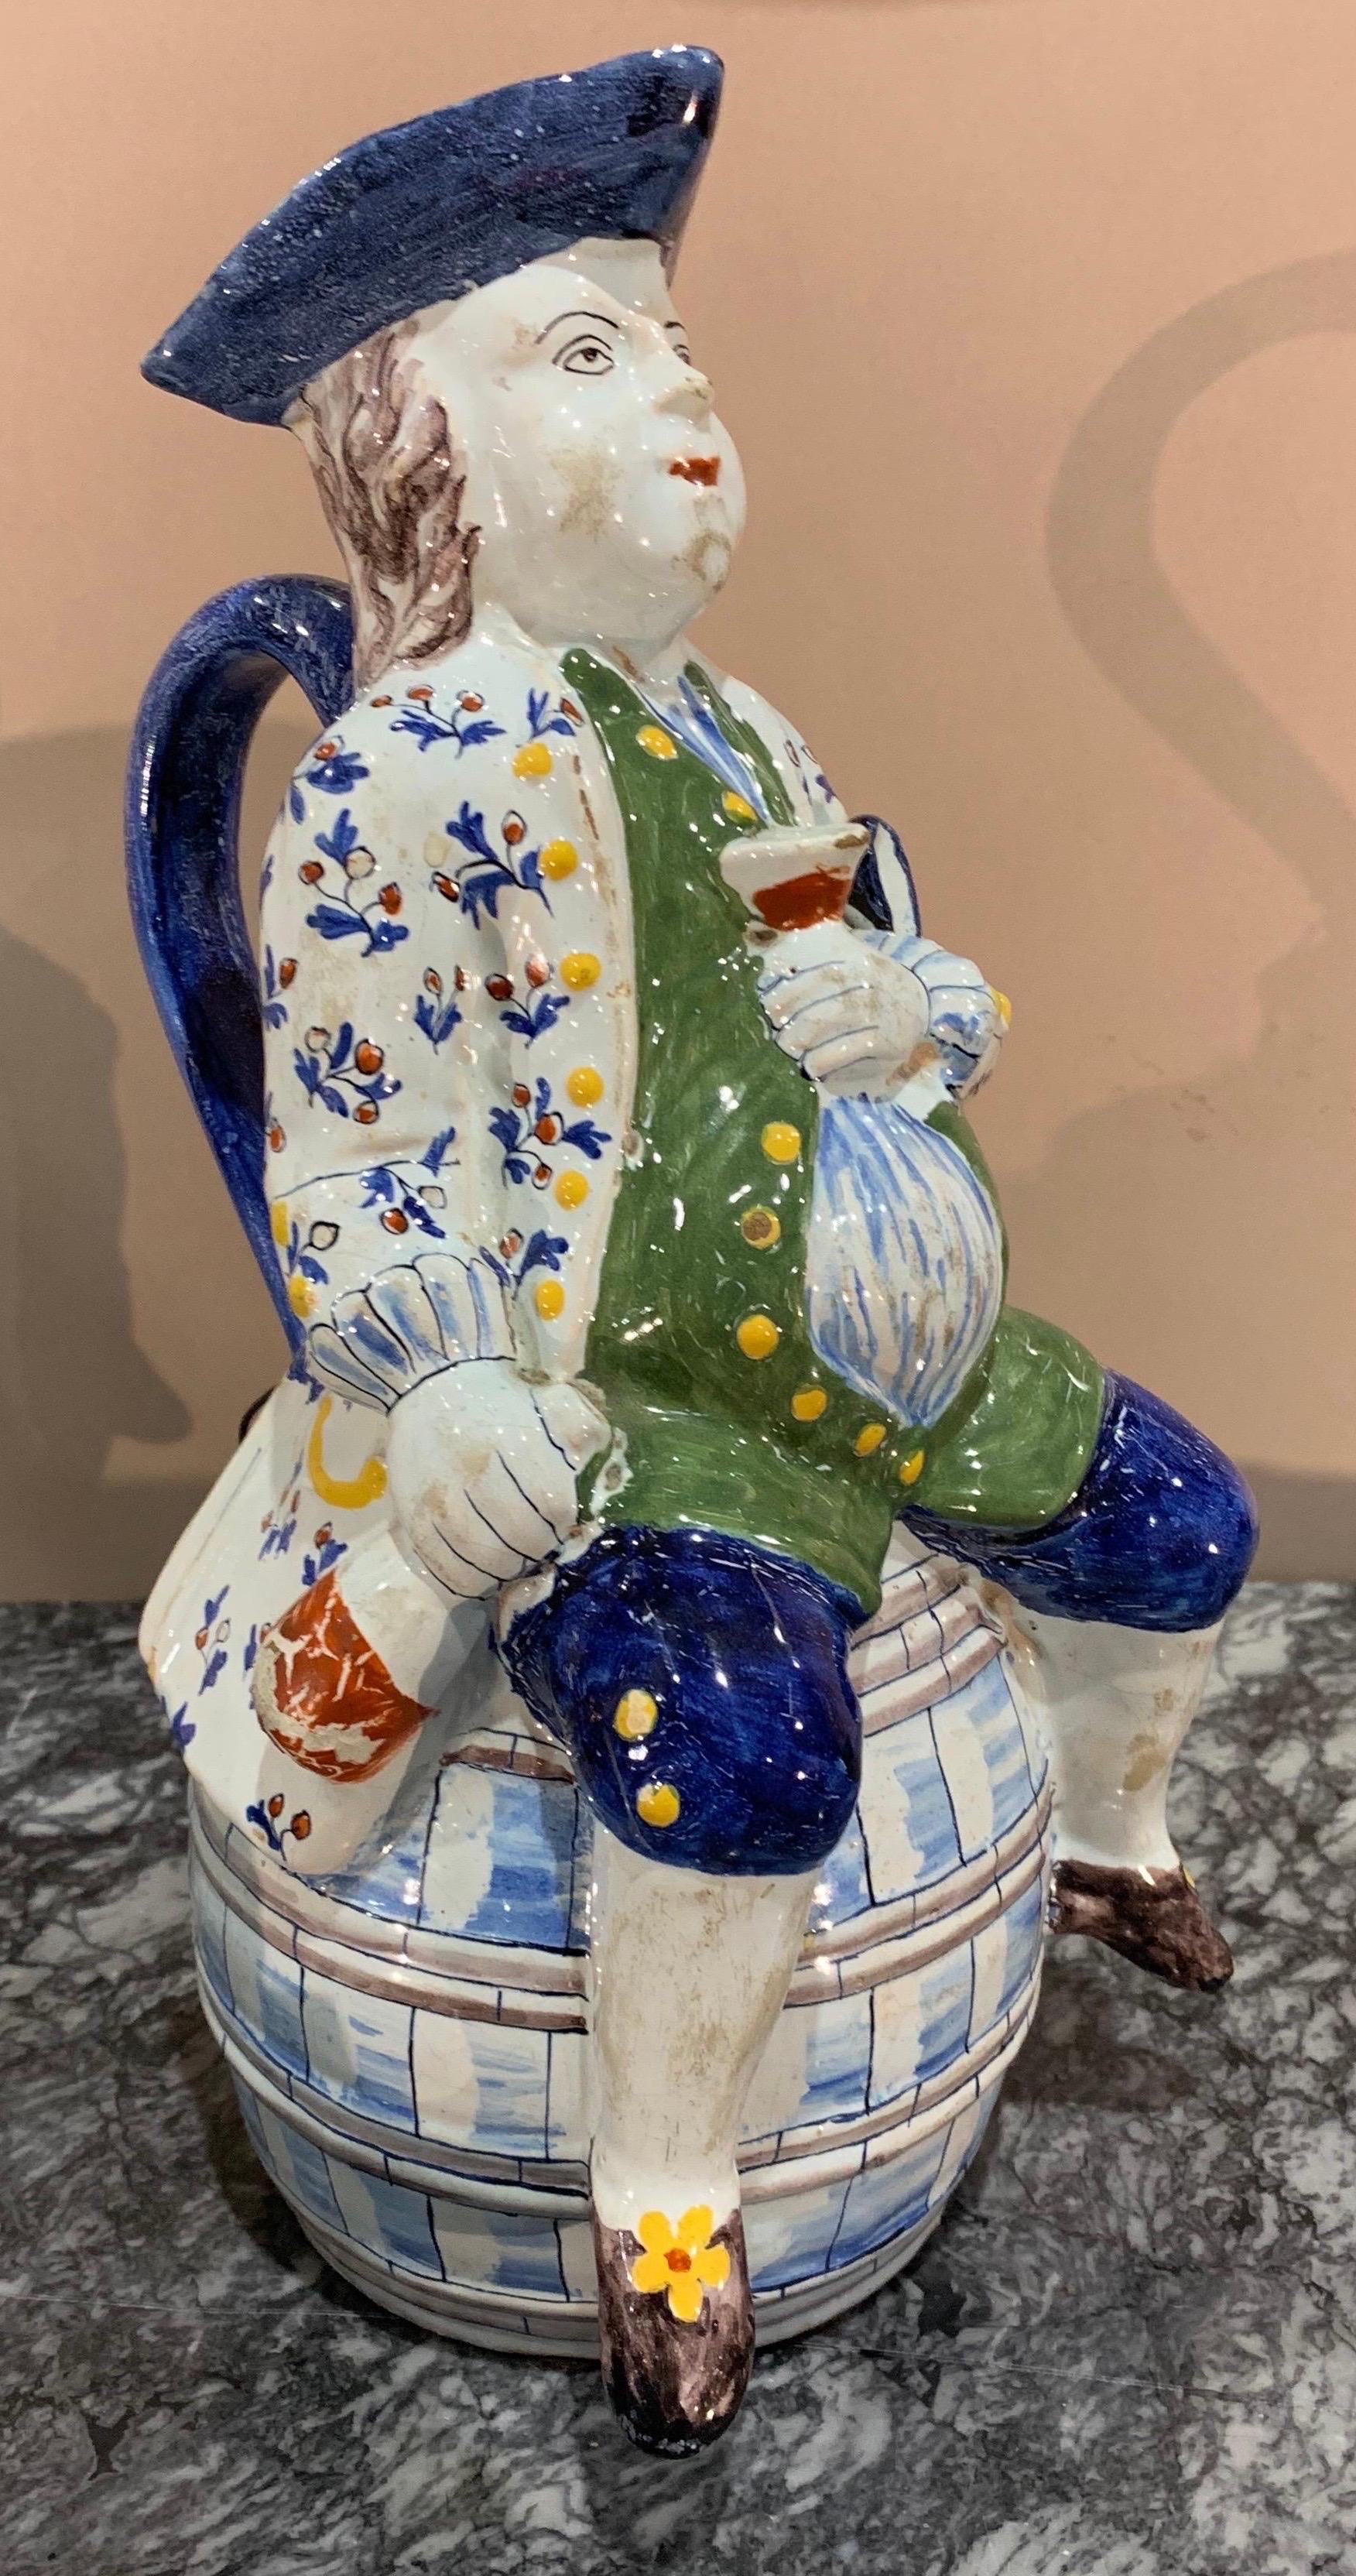 19th century French faience polychrome wine decanter.